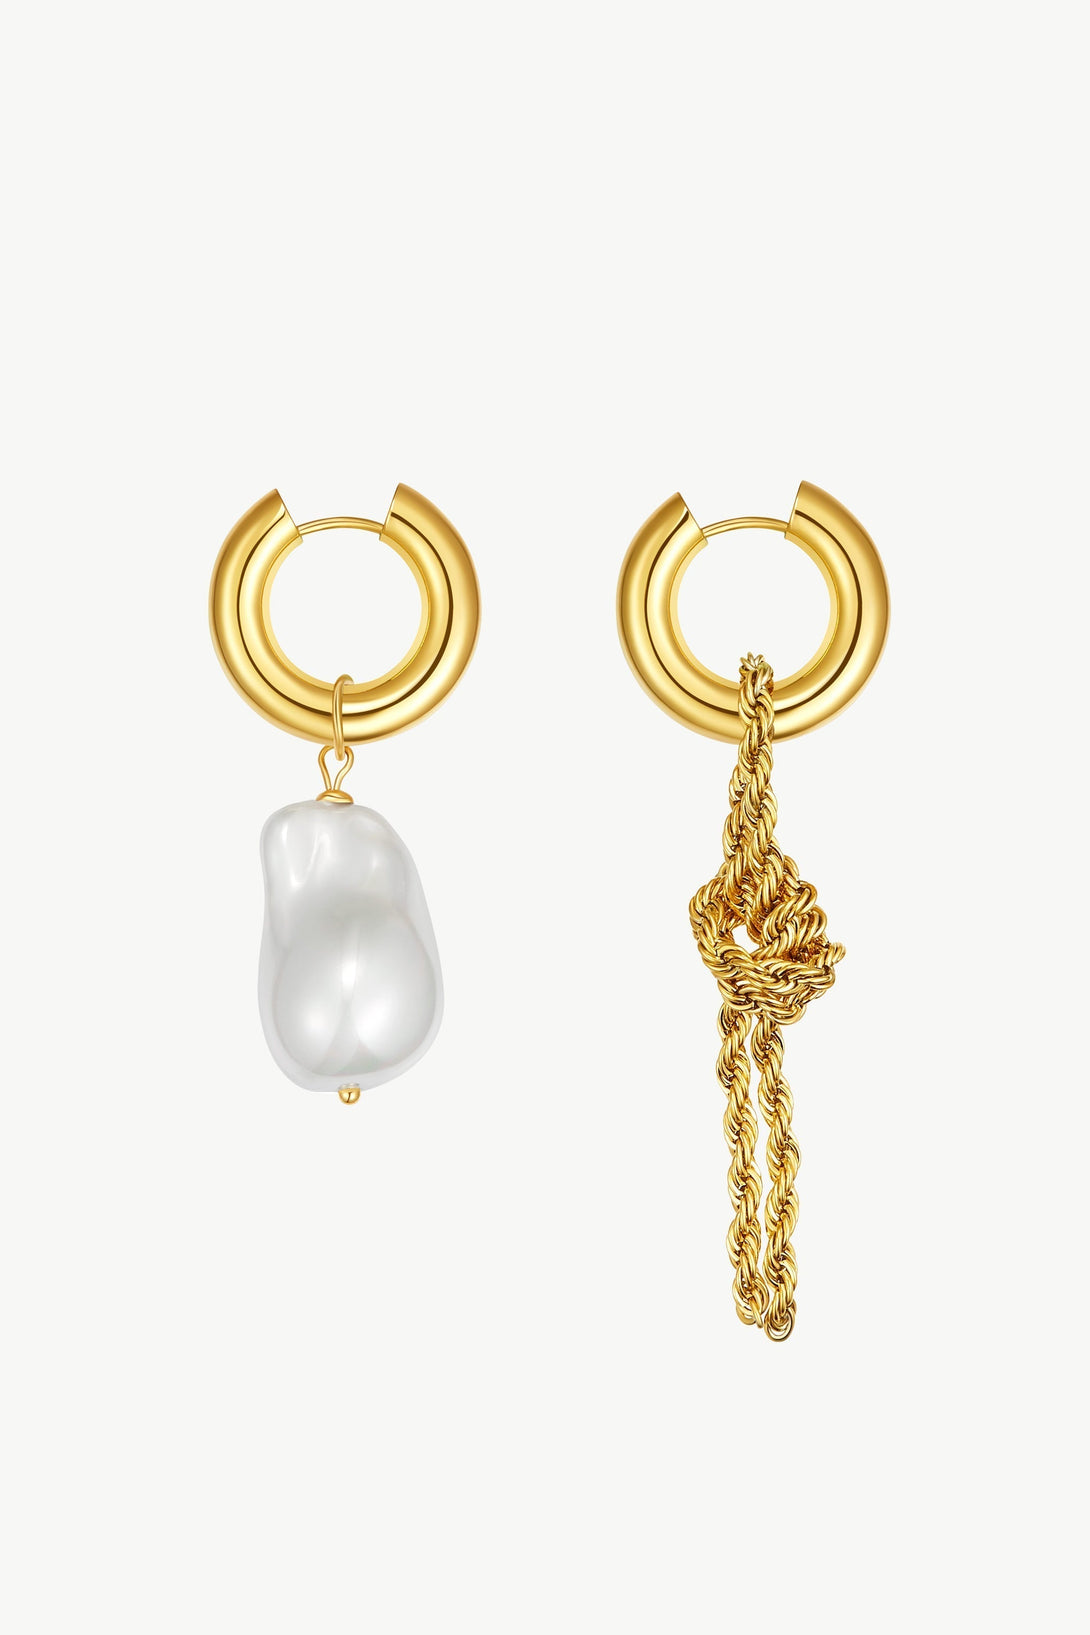 Unique Asymmetrical Gold Rope Chain Baroque Pearl Drop Earrings - Classicharms